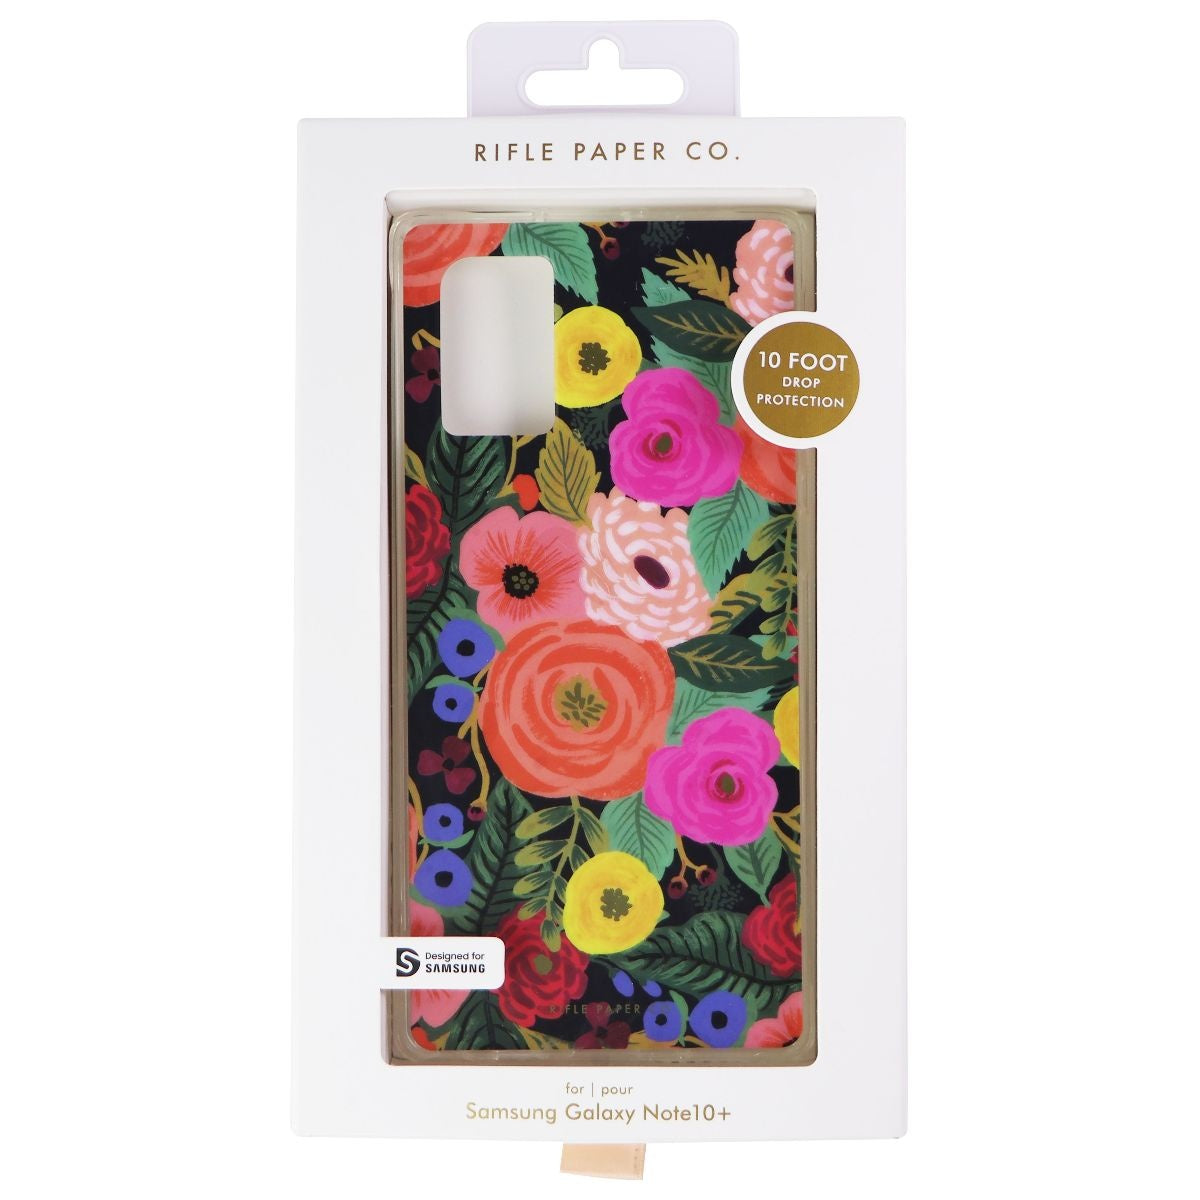 Rifle Paper Co. Hybrid Case for Samsung Galaxy (Note10+) - Floral/Juliet Rose Cell Phone - Cases, Covers & Skins Case-Mate    - Simple Cell Bulk Wholesale Pricing - USA Seller